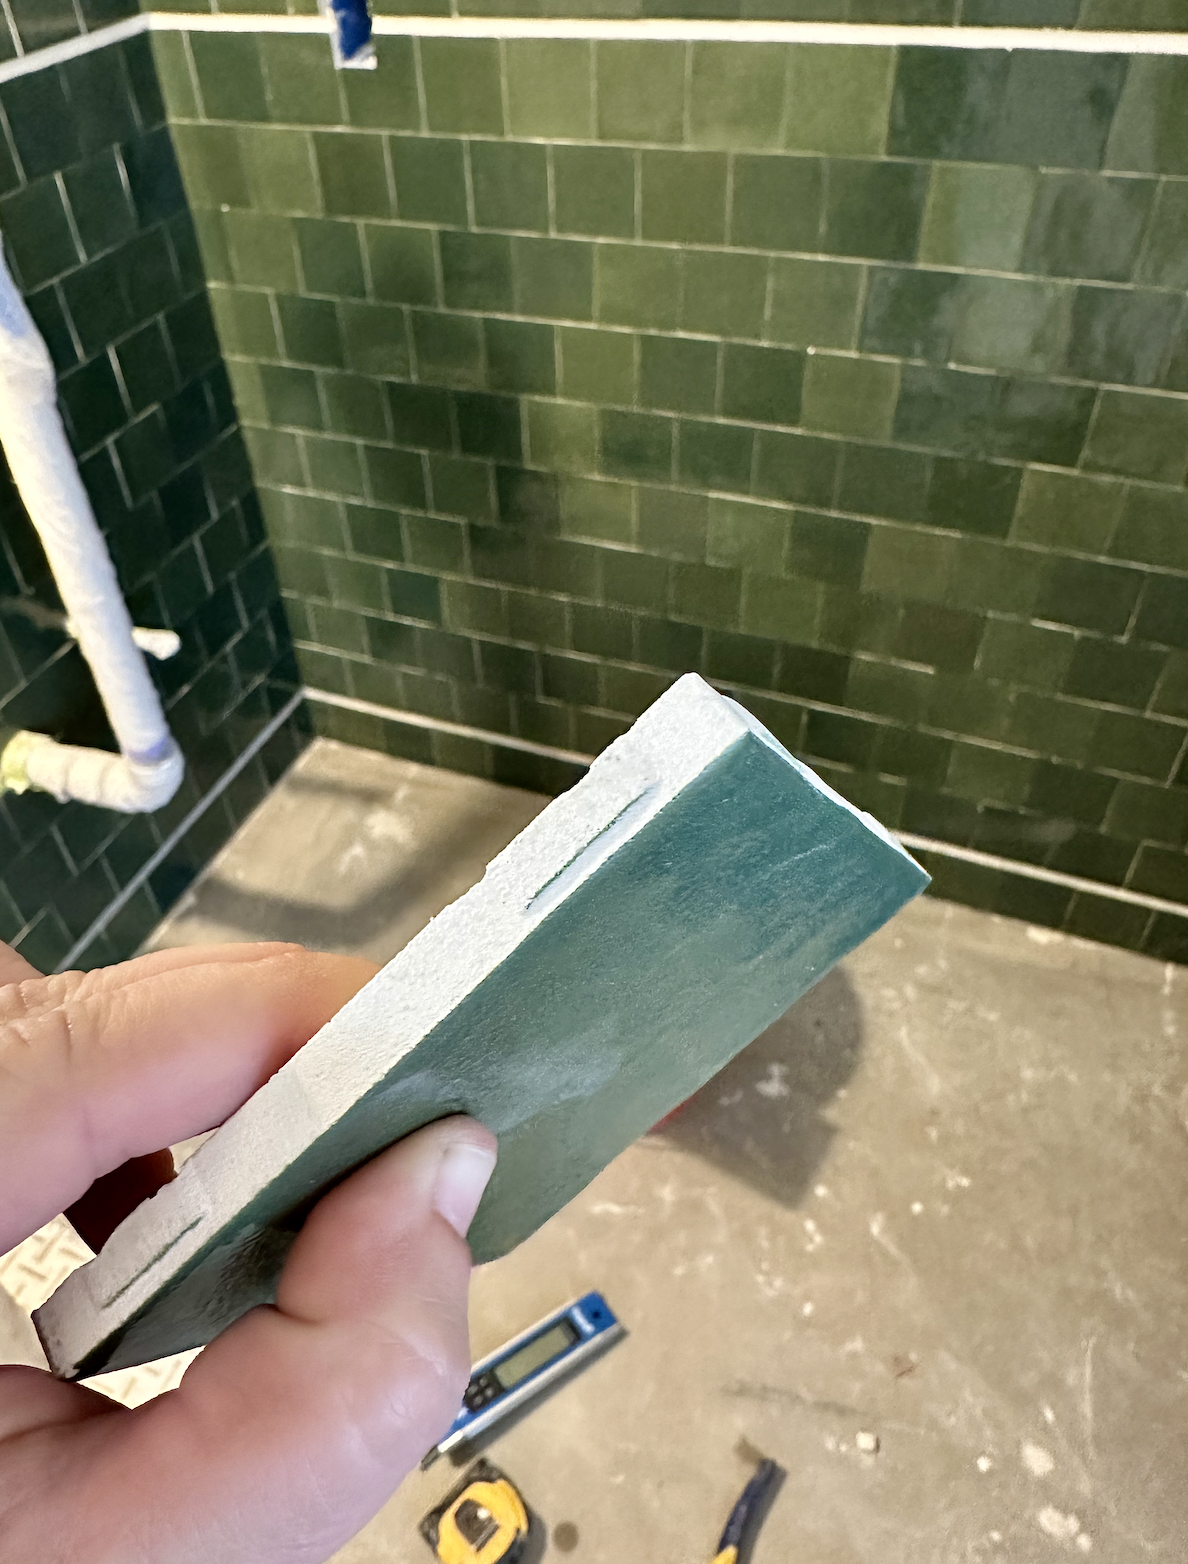 benefits of steam cleaning your tile and grout - Grout Restoration Works  2019 Blog